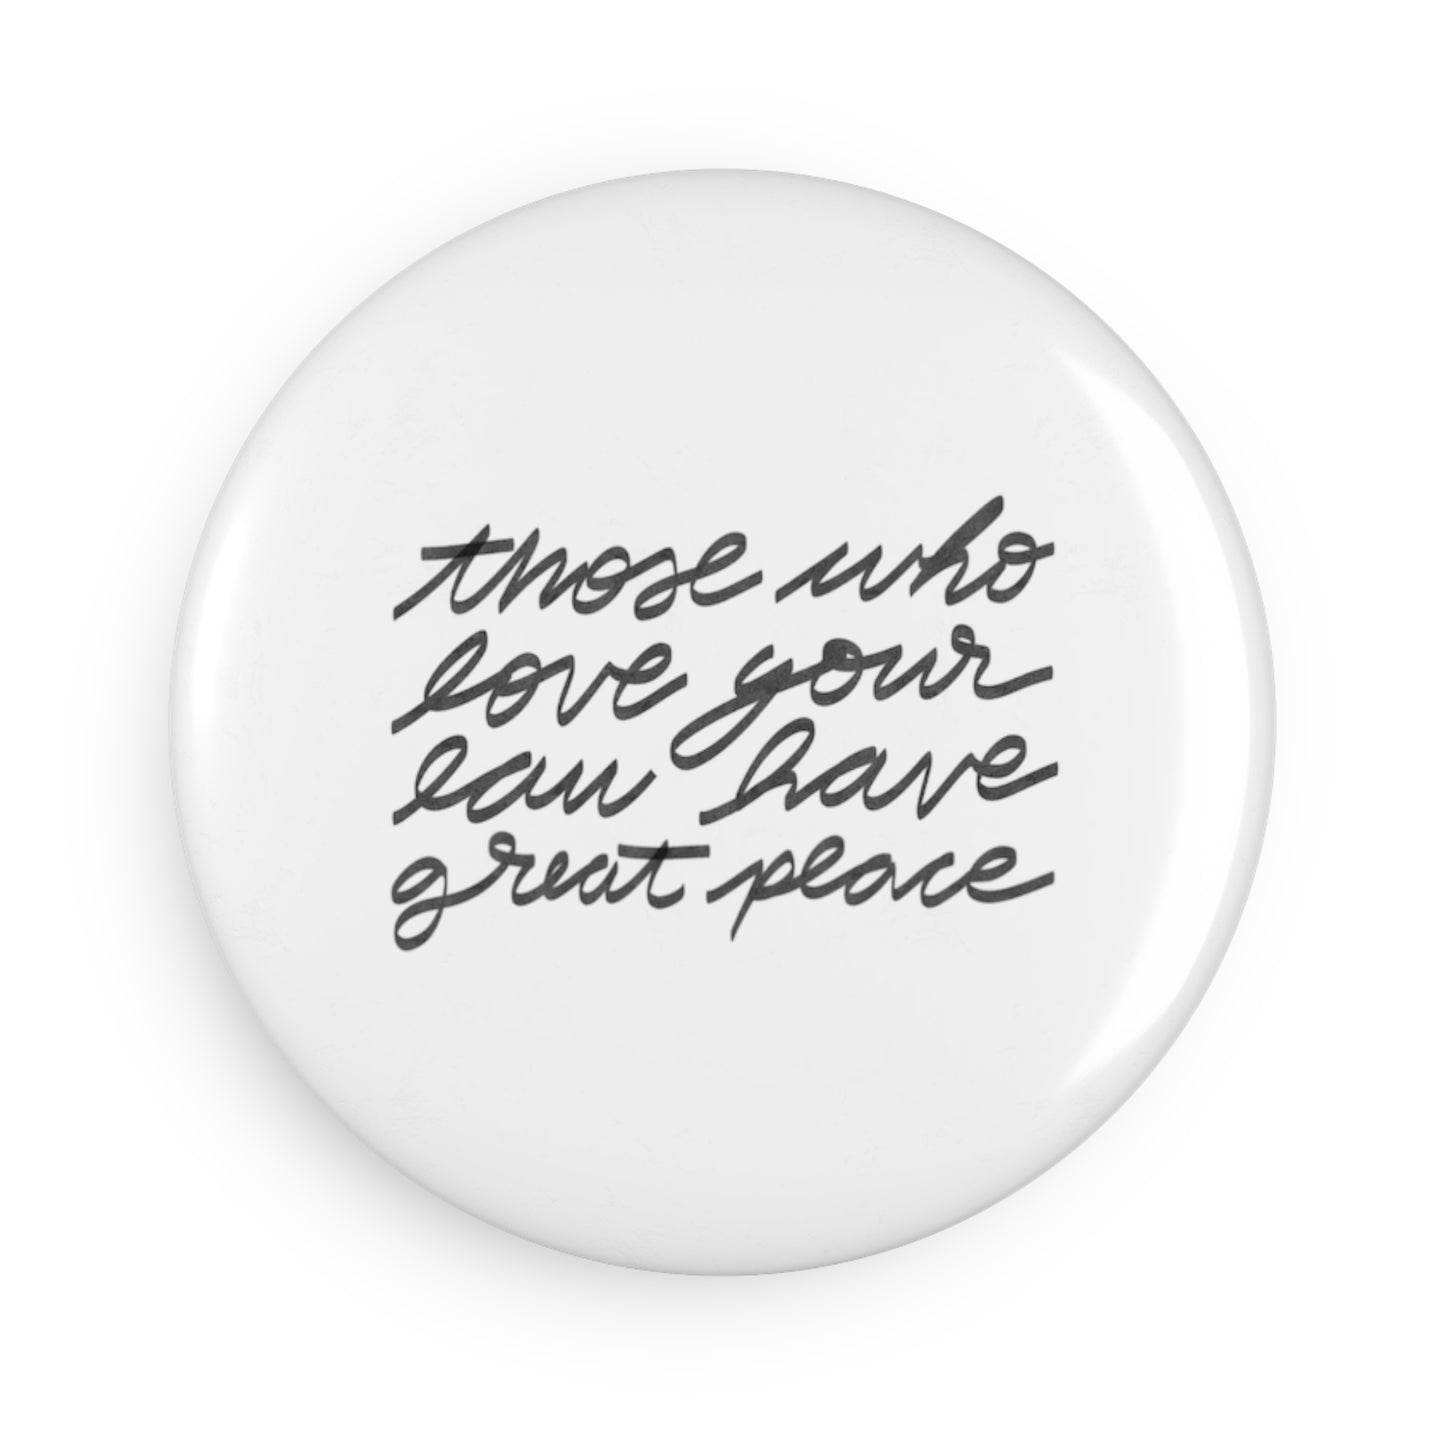 Round Button Magnet - Great Peace - A Thousand Elsewhere